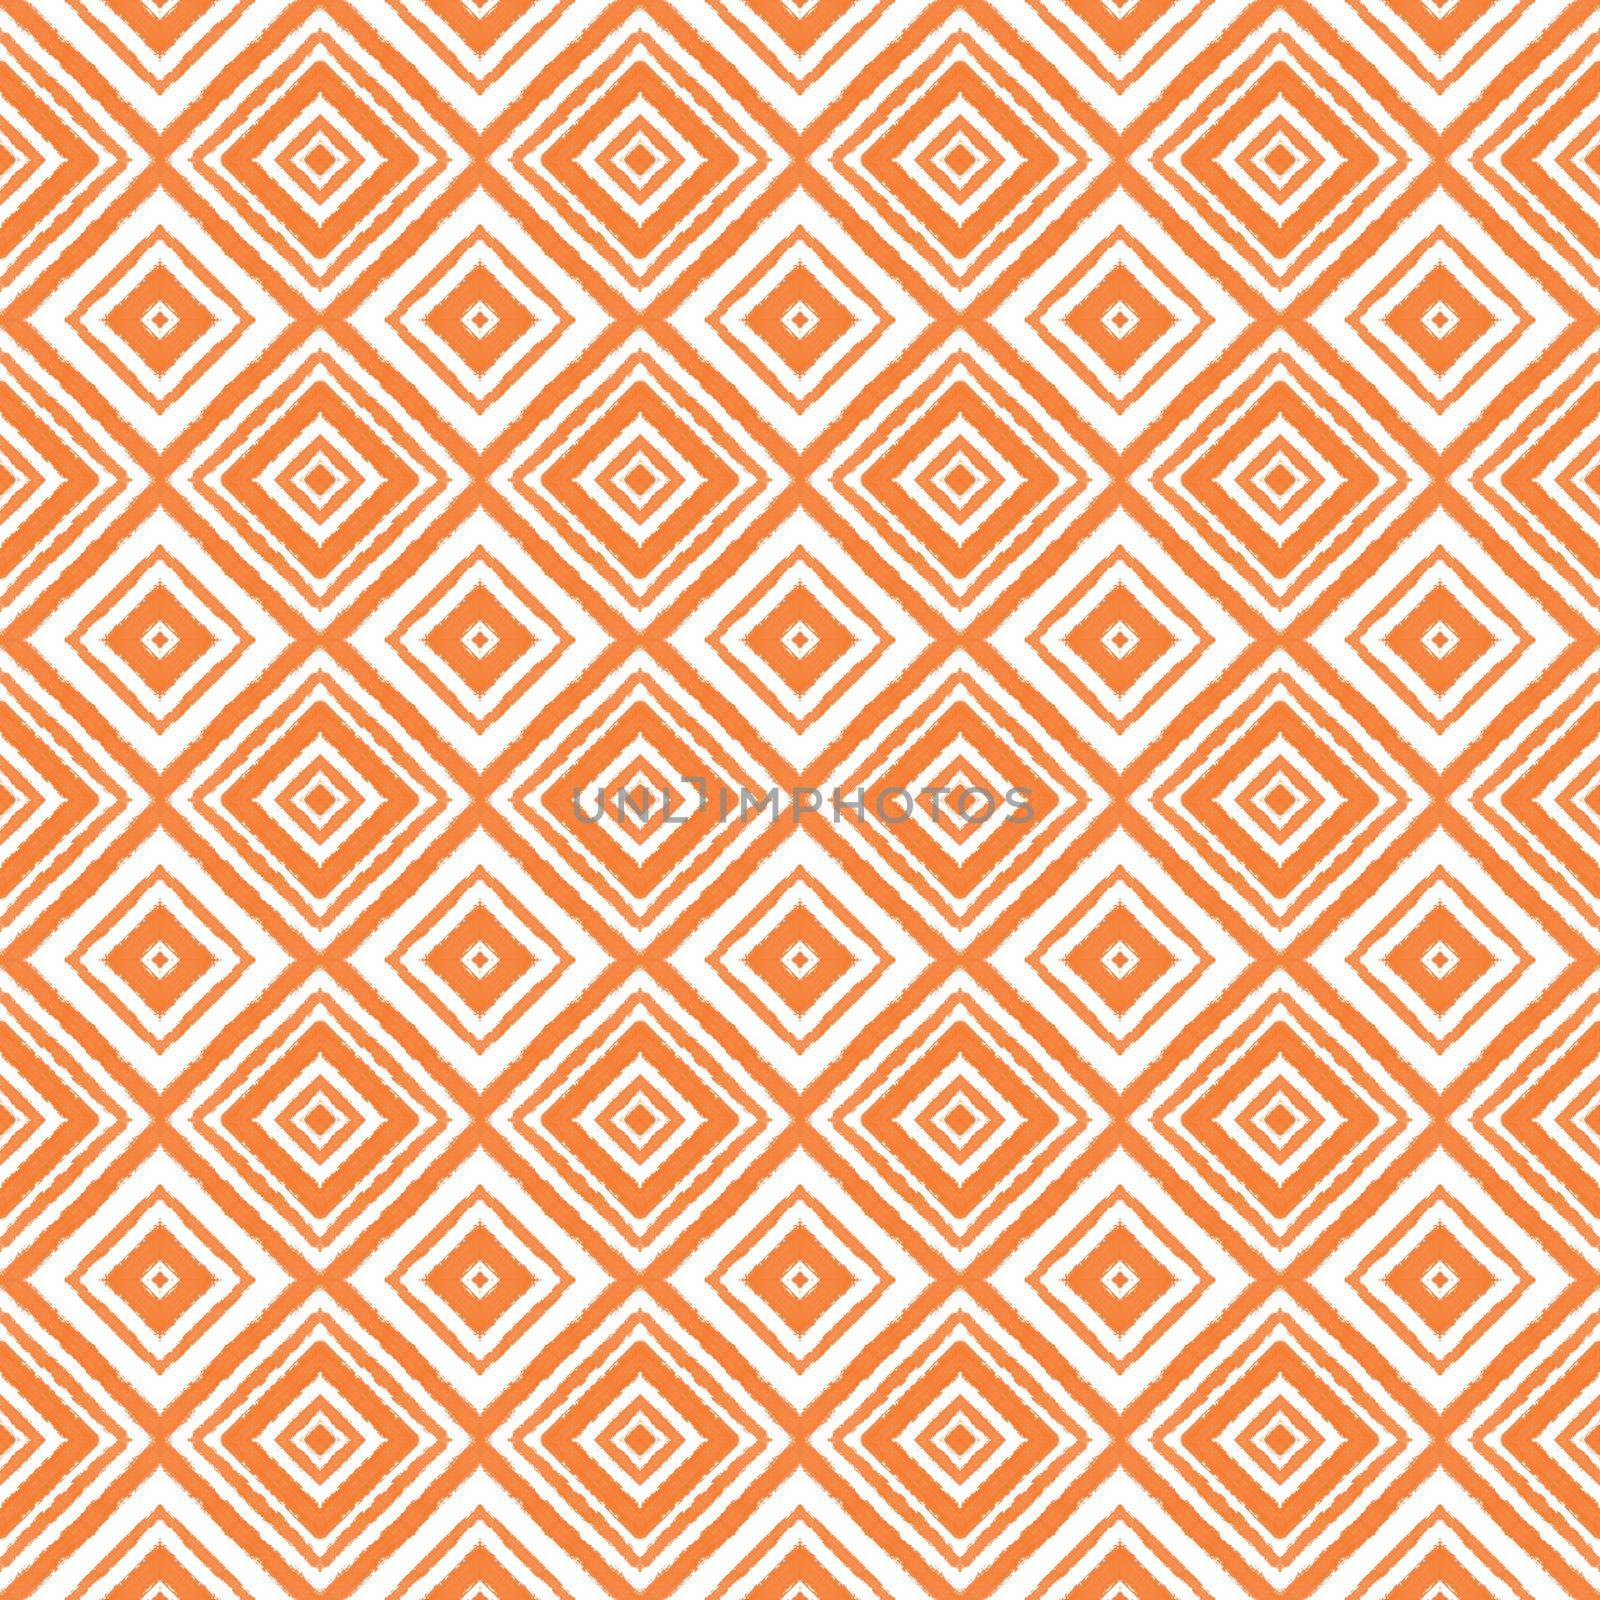 Tiled watercolor pattern. Orange symmetrical kaleidoscope background. Hand painted tiled watercolor seamless. Textile ready radiant print, swimwear fabric, wallpaper, wrapping.